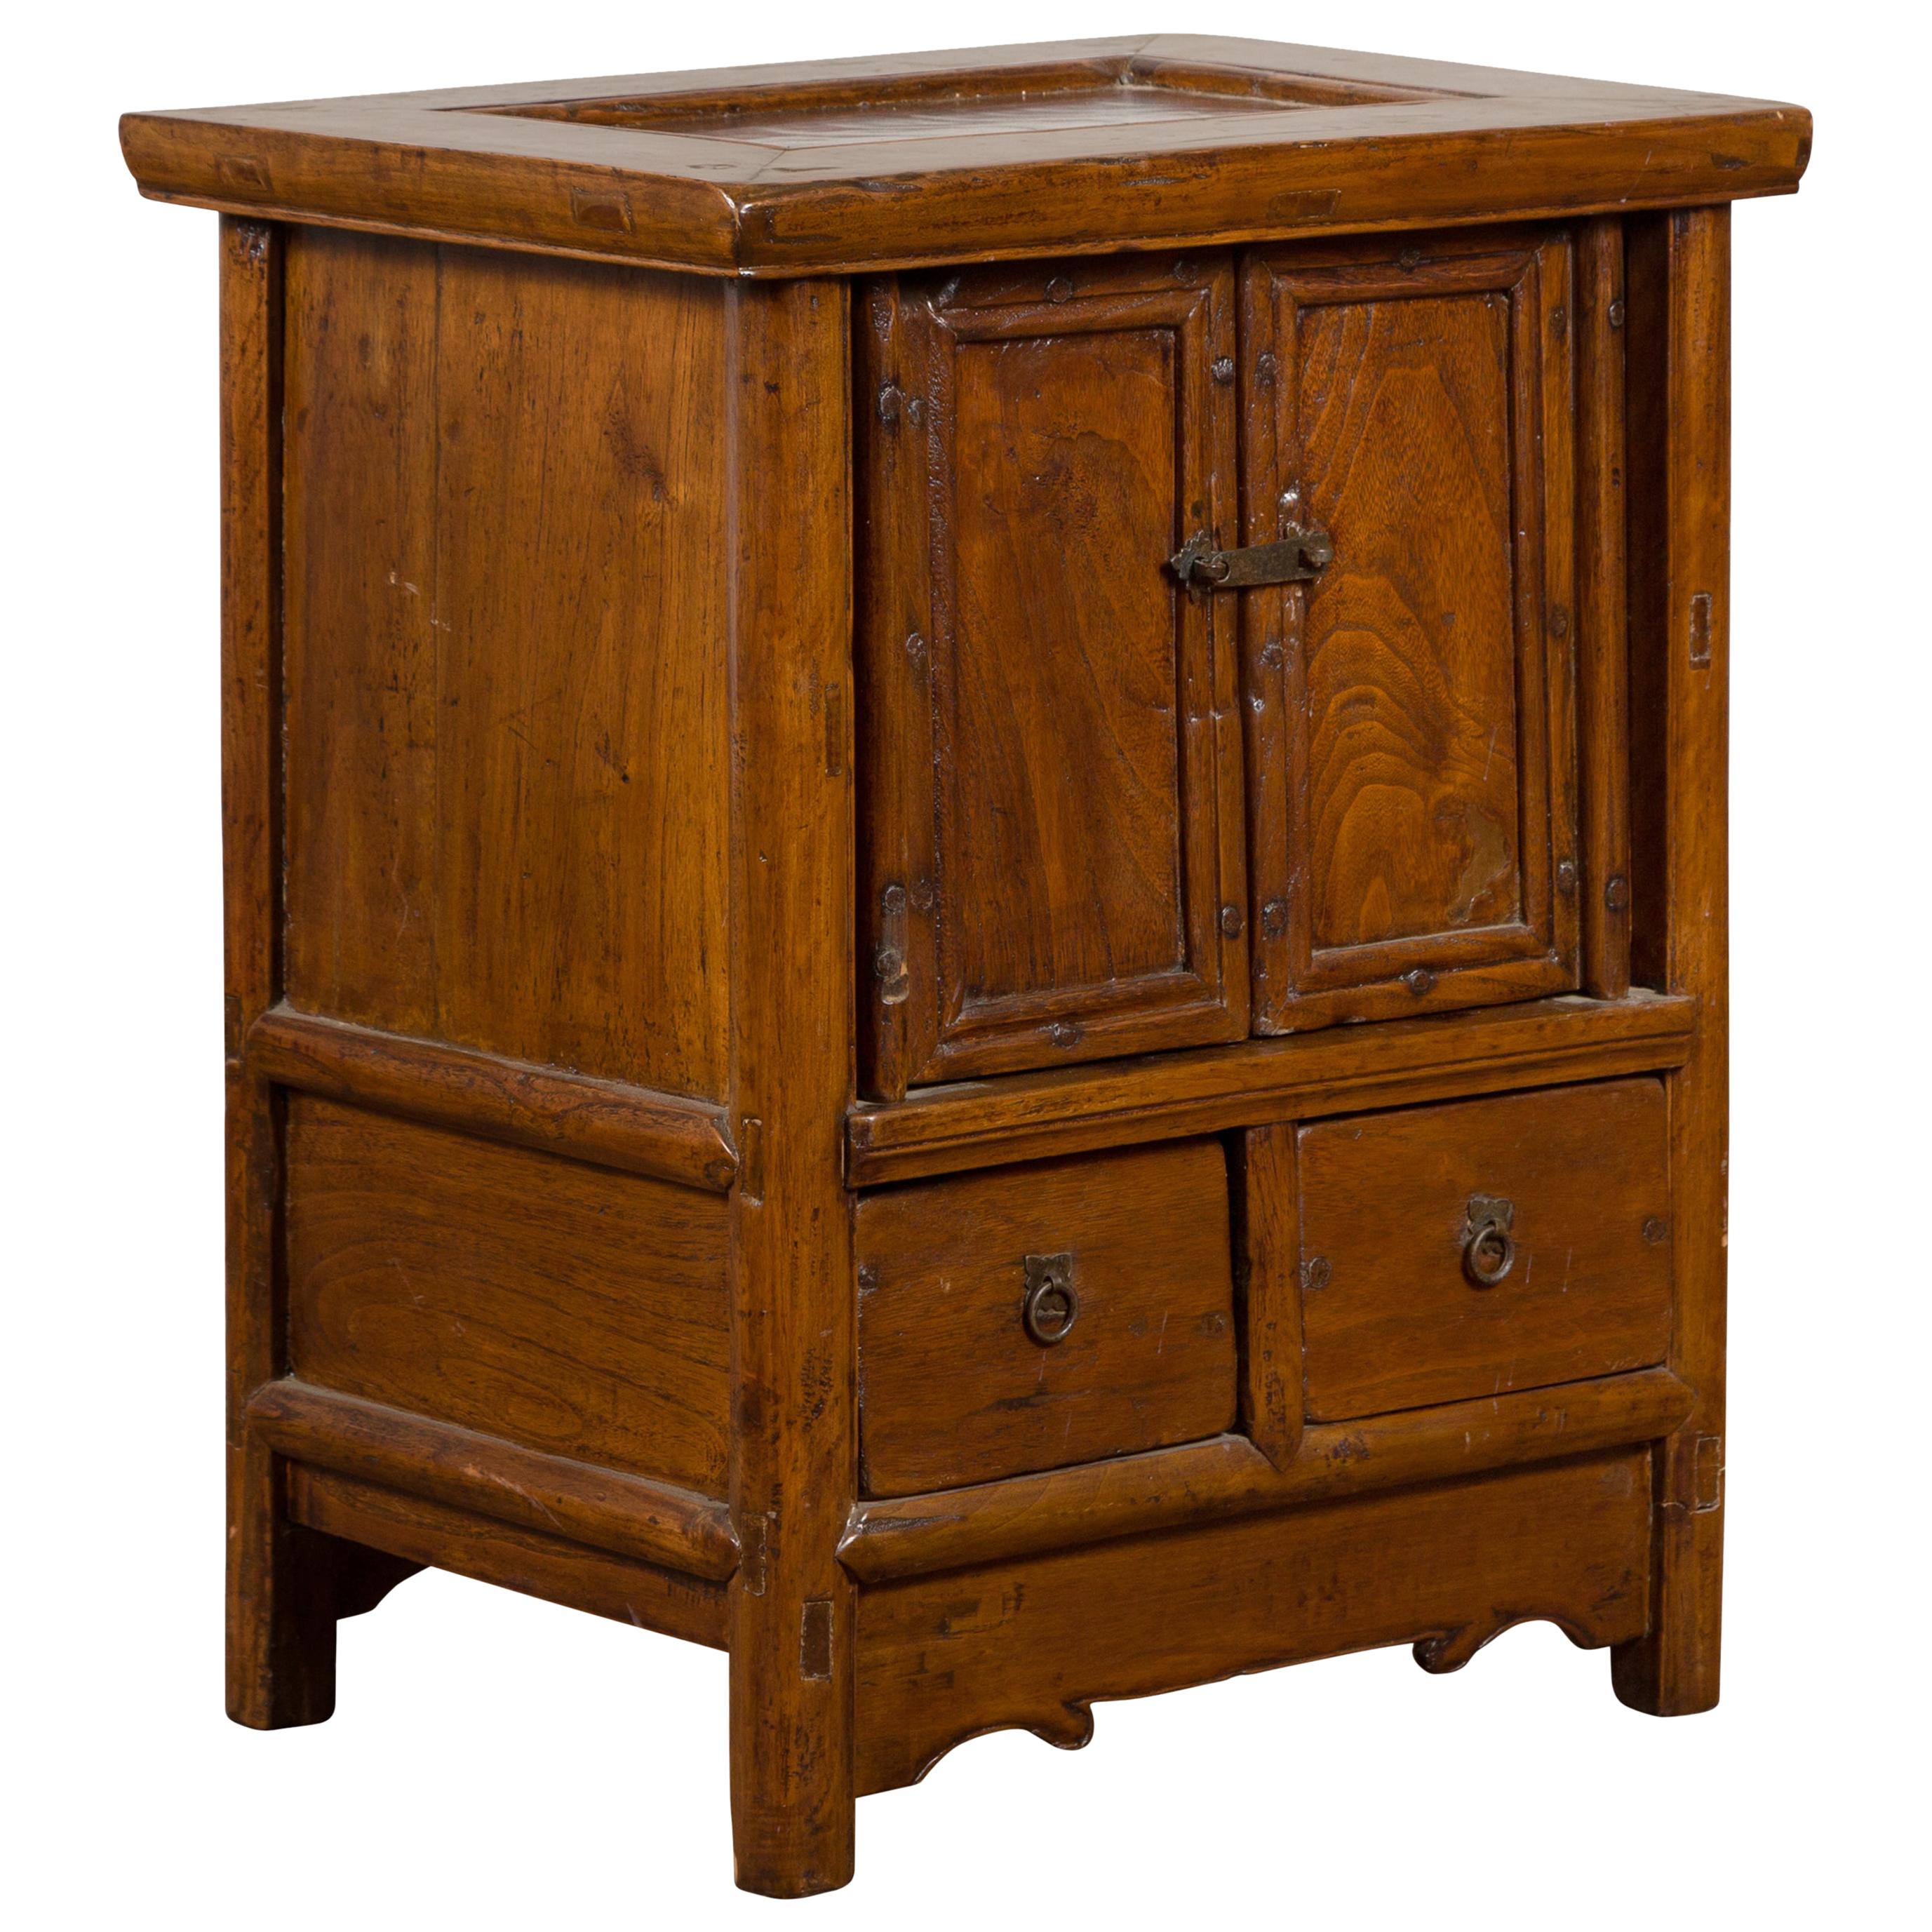 Chinese Qing Dynasty Period 19th Century Bedside Cabinet with Doors and Drawers